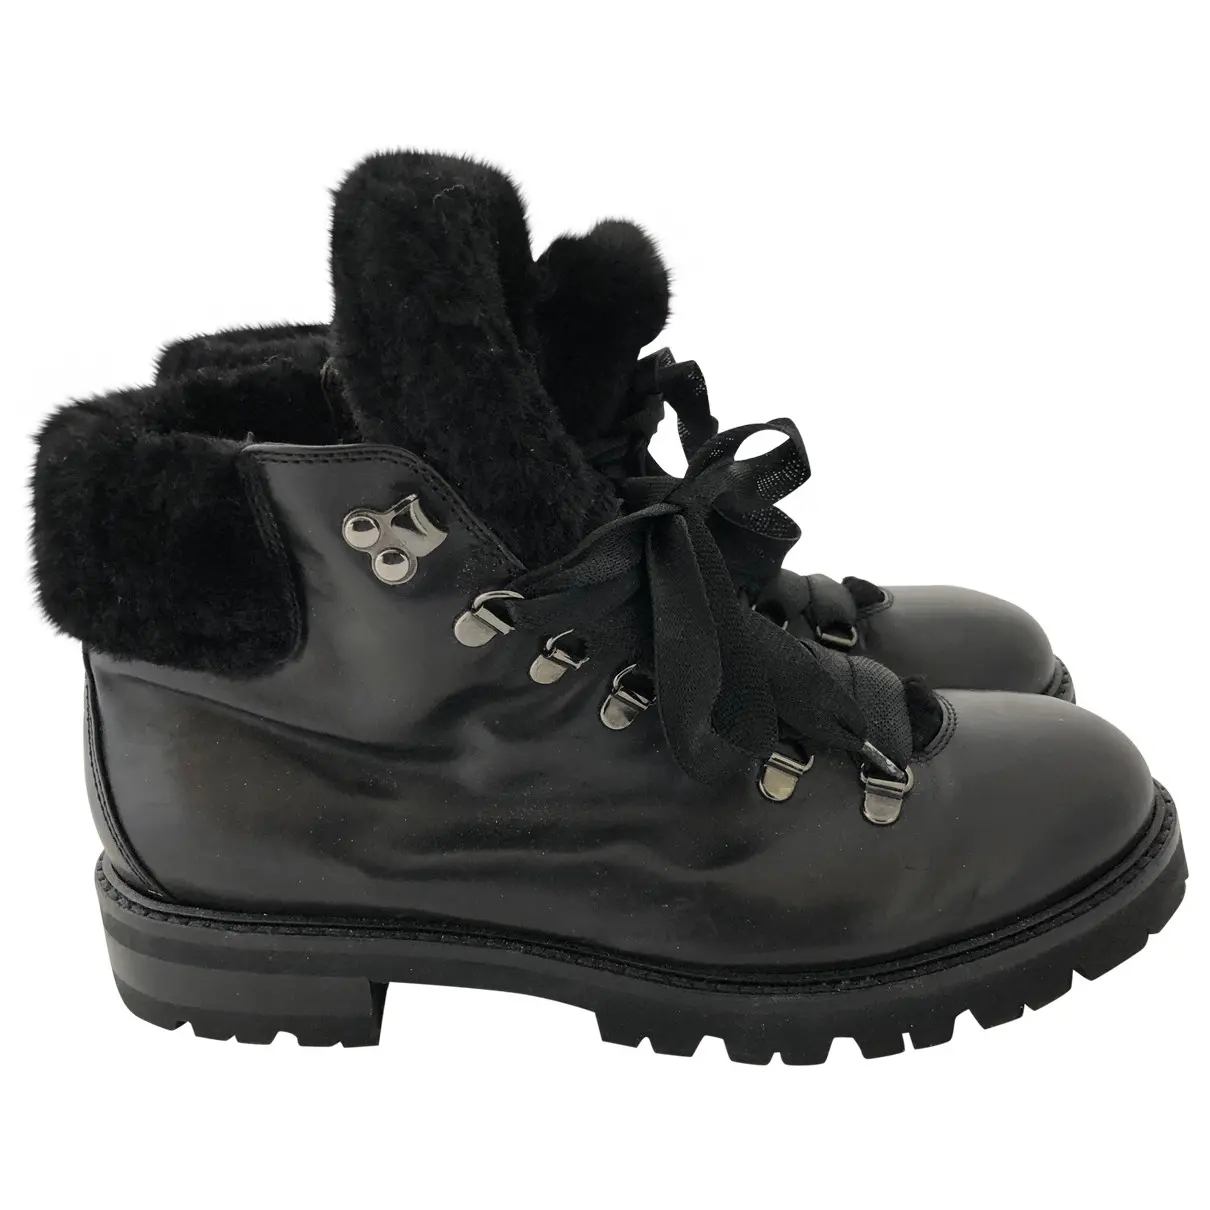 Leather lace up boots Agl